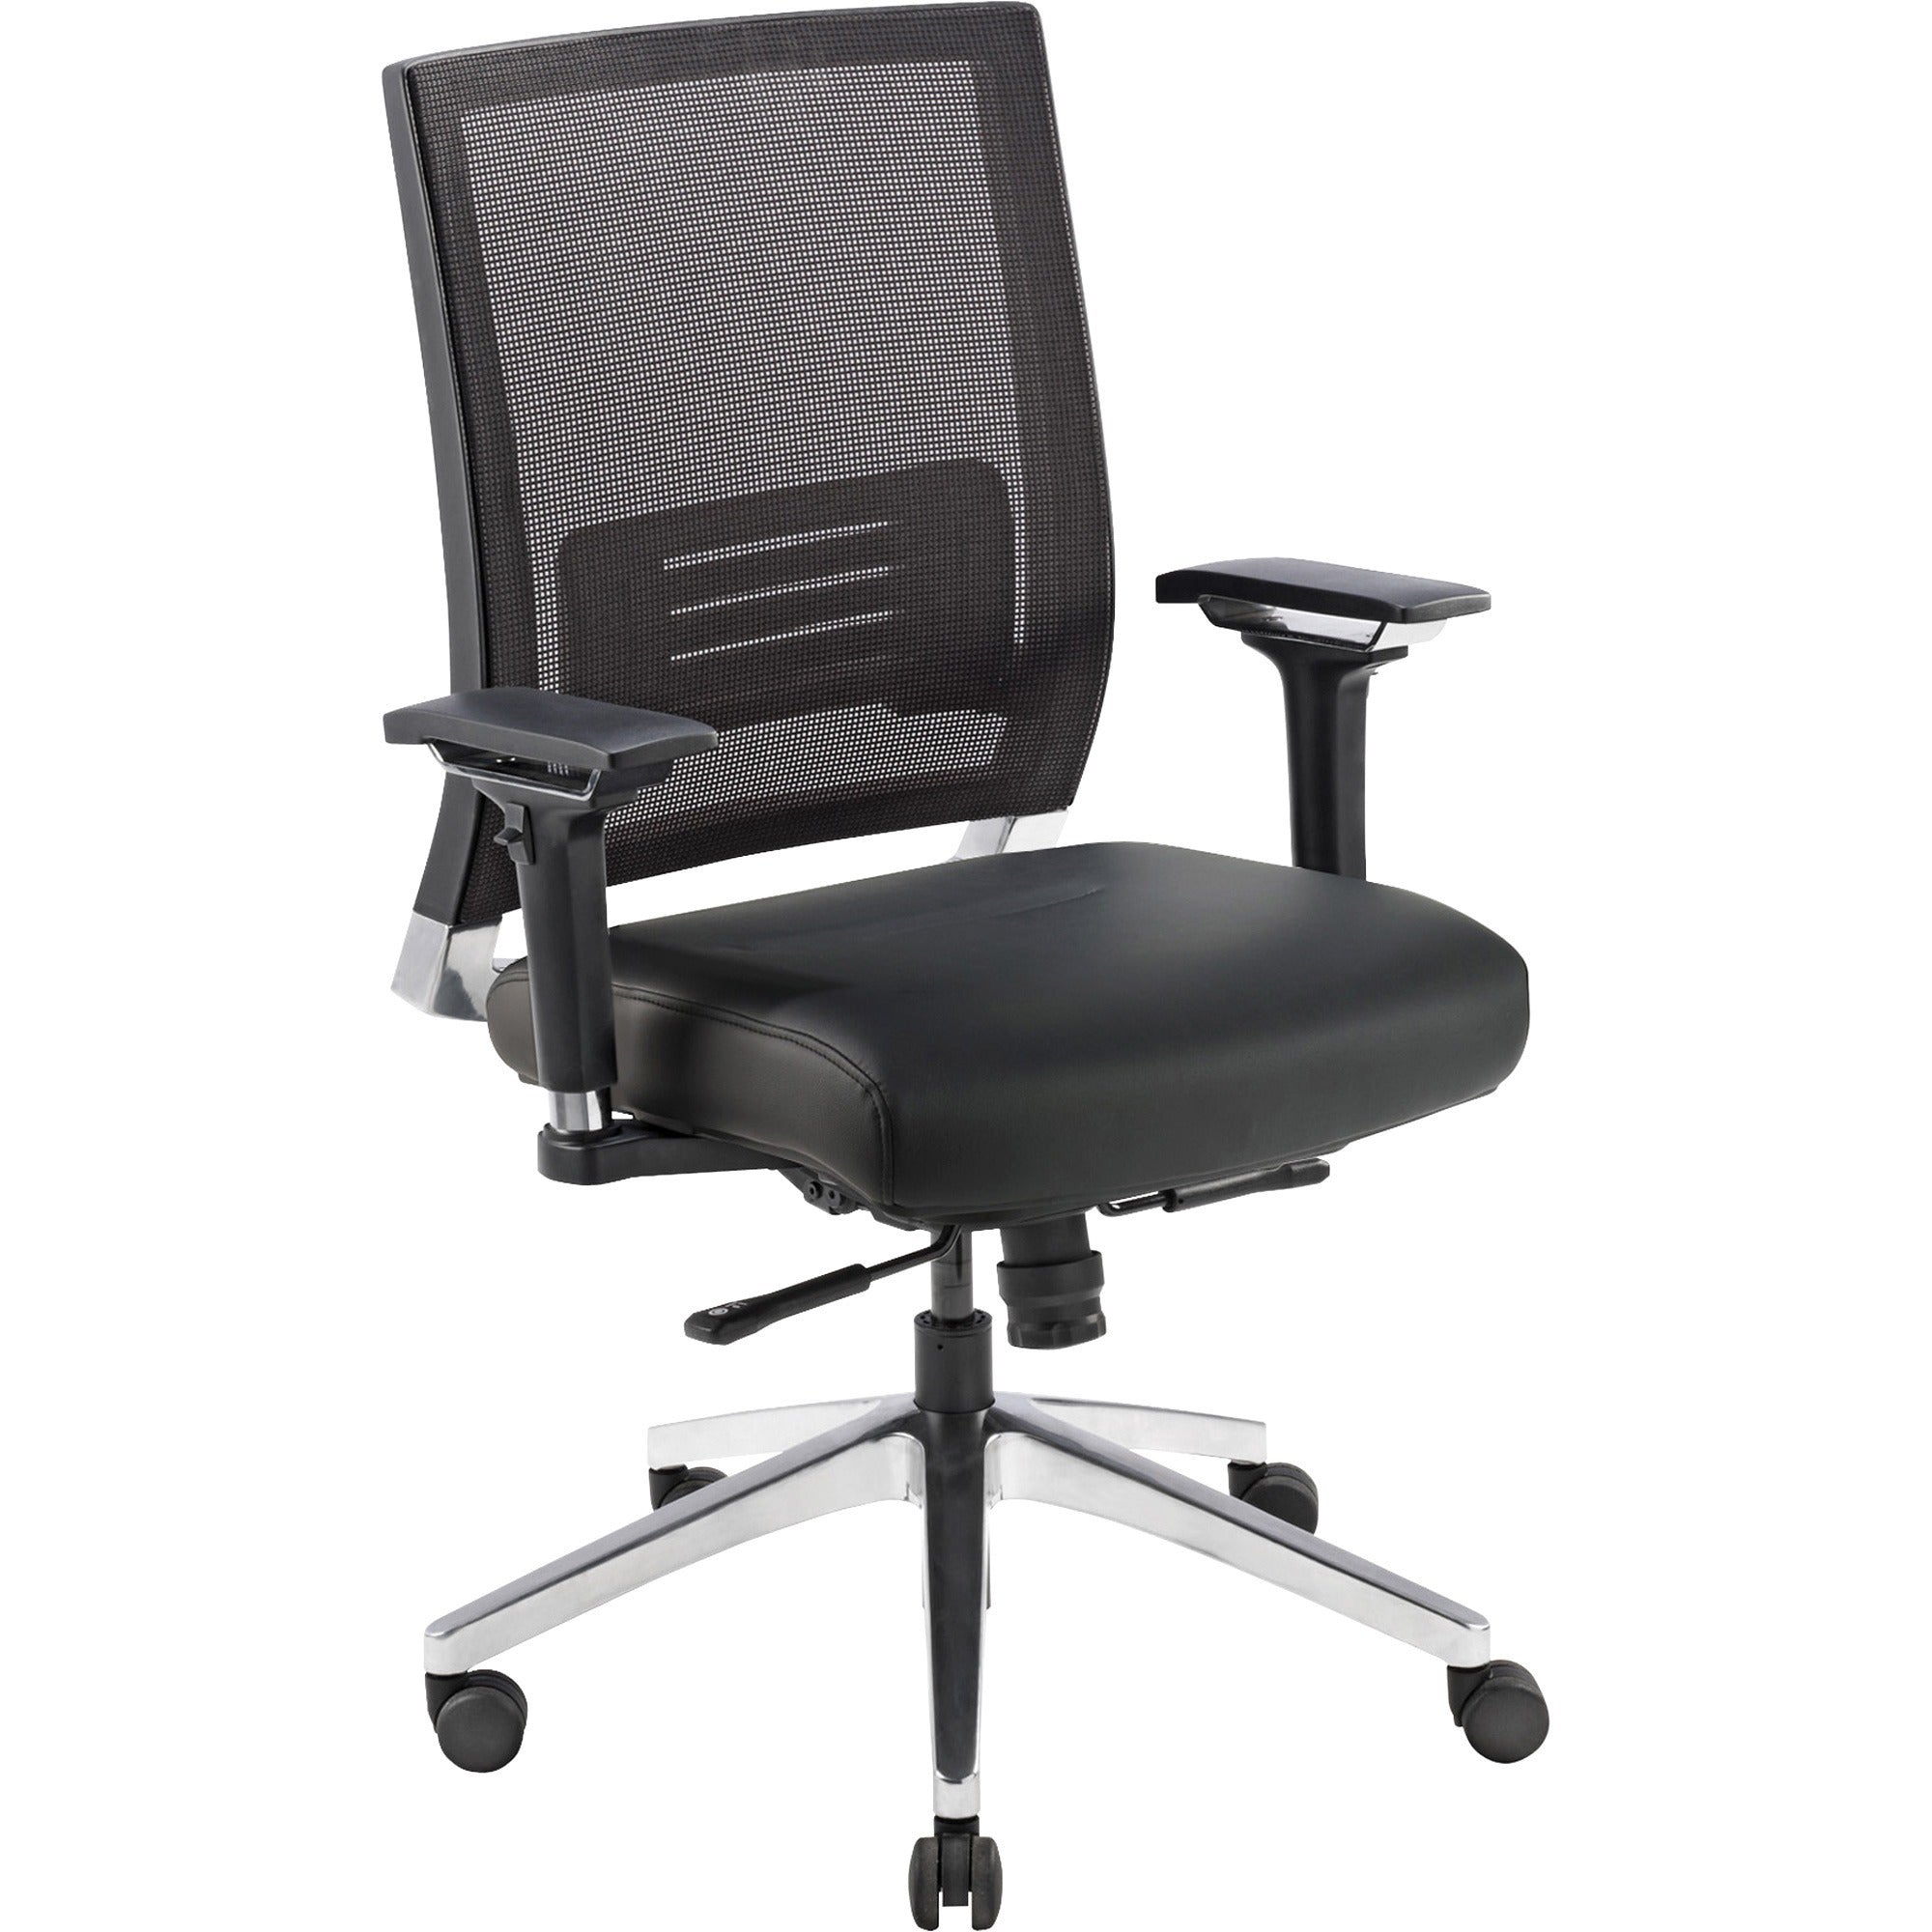 Lorell Heavy-duty Full-Function Executive Mesh Back Office Chair - Black Leather Seat - 5-star Base - Black - 1 Each - 